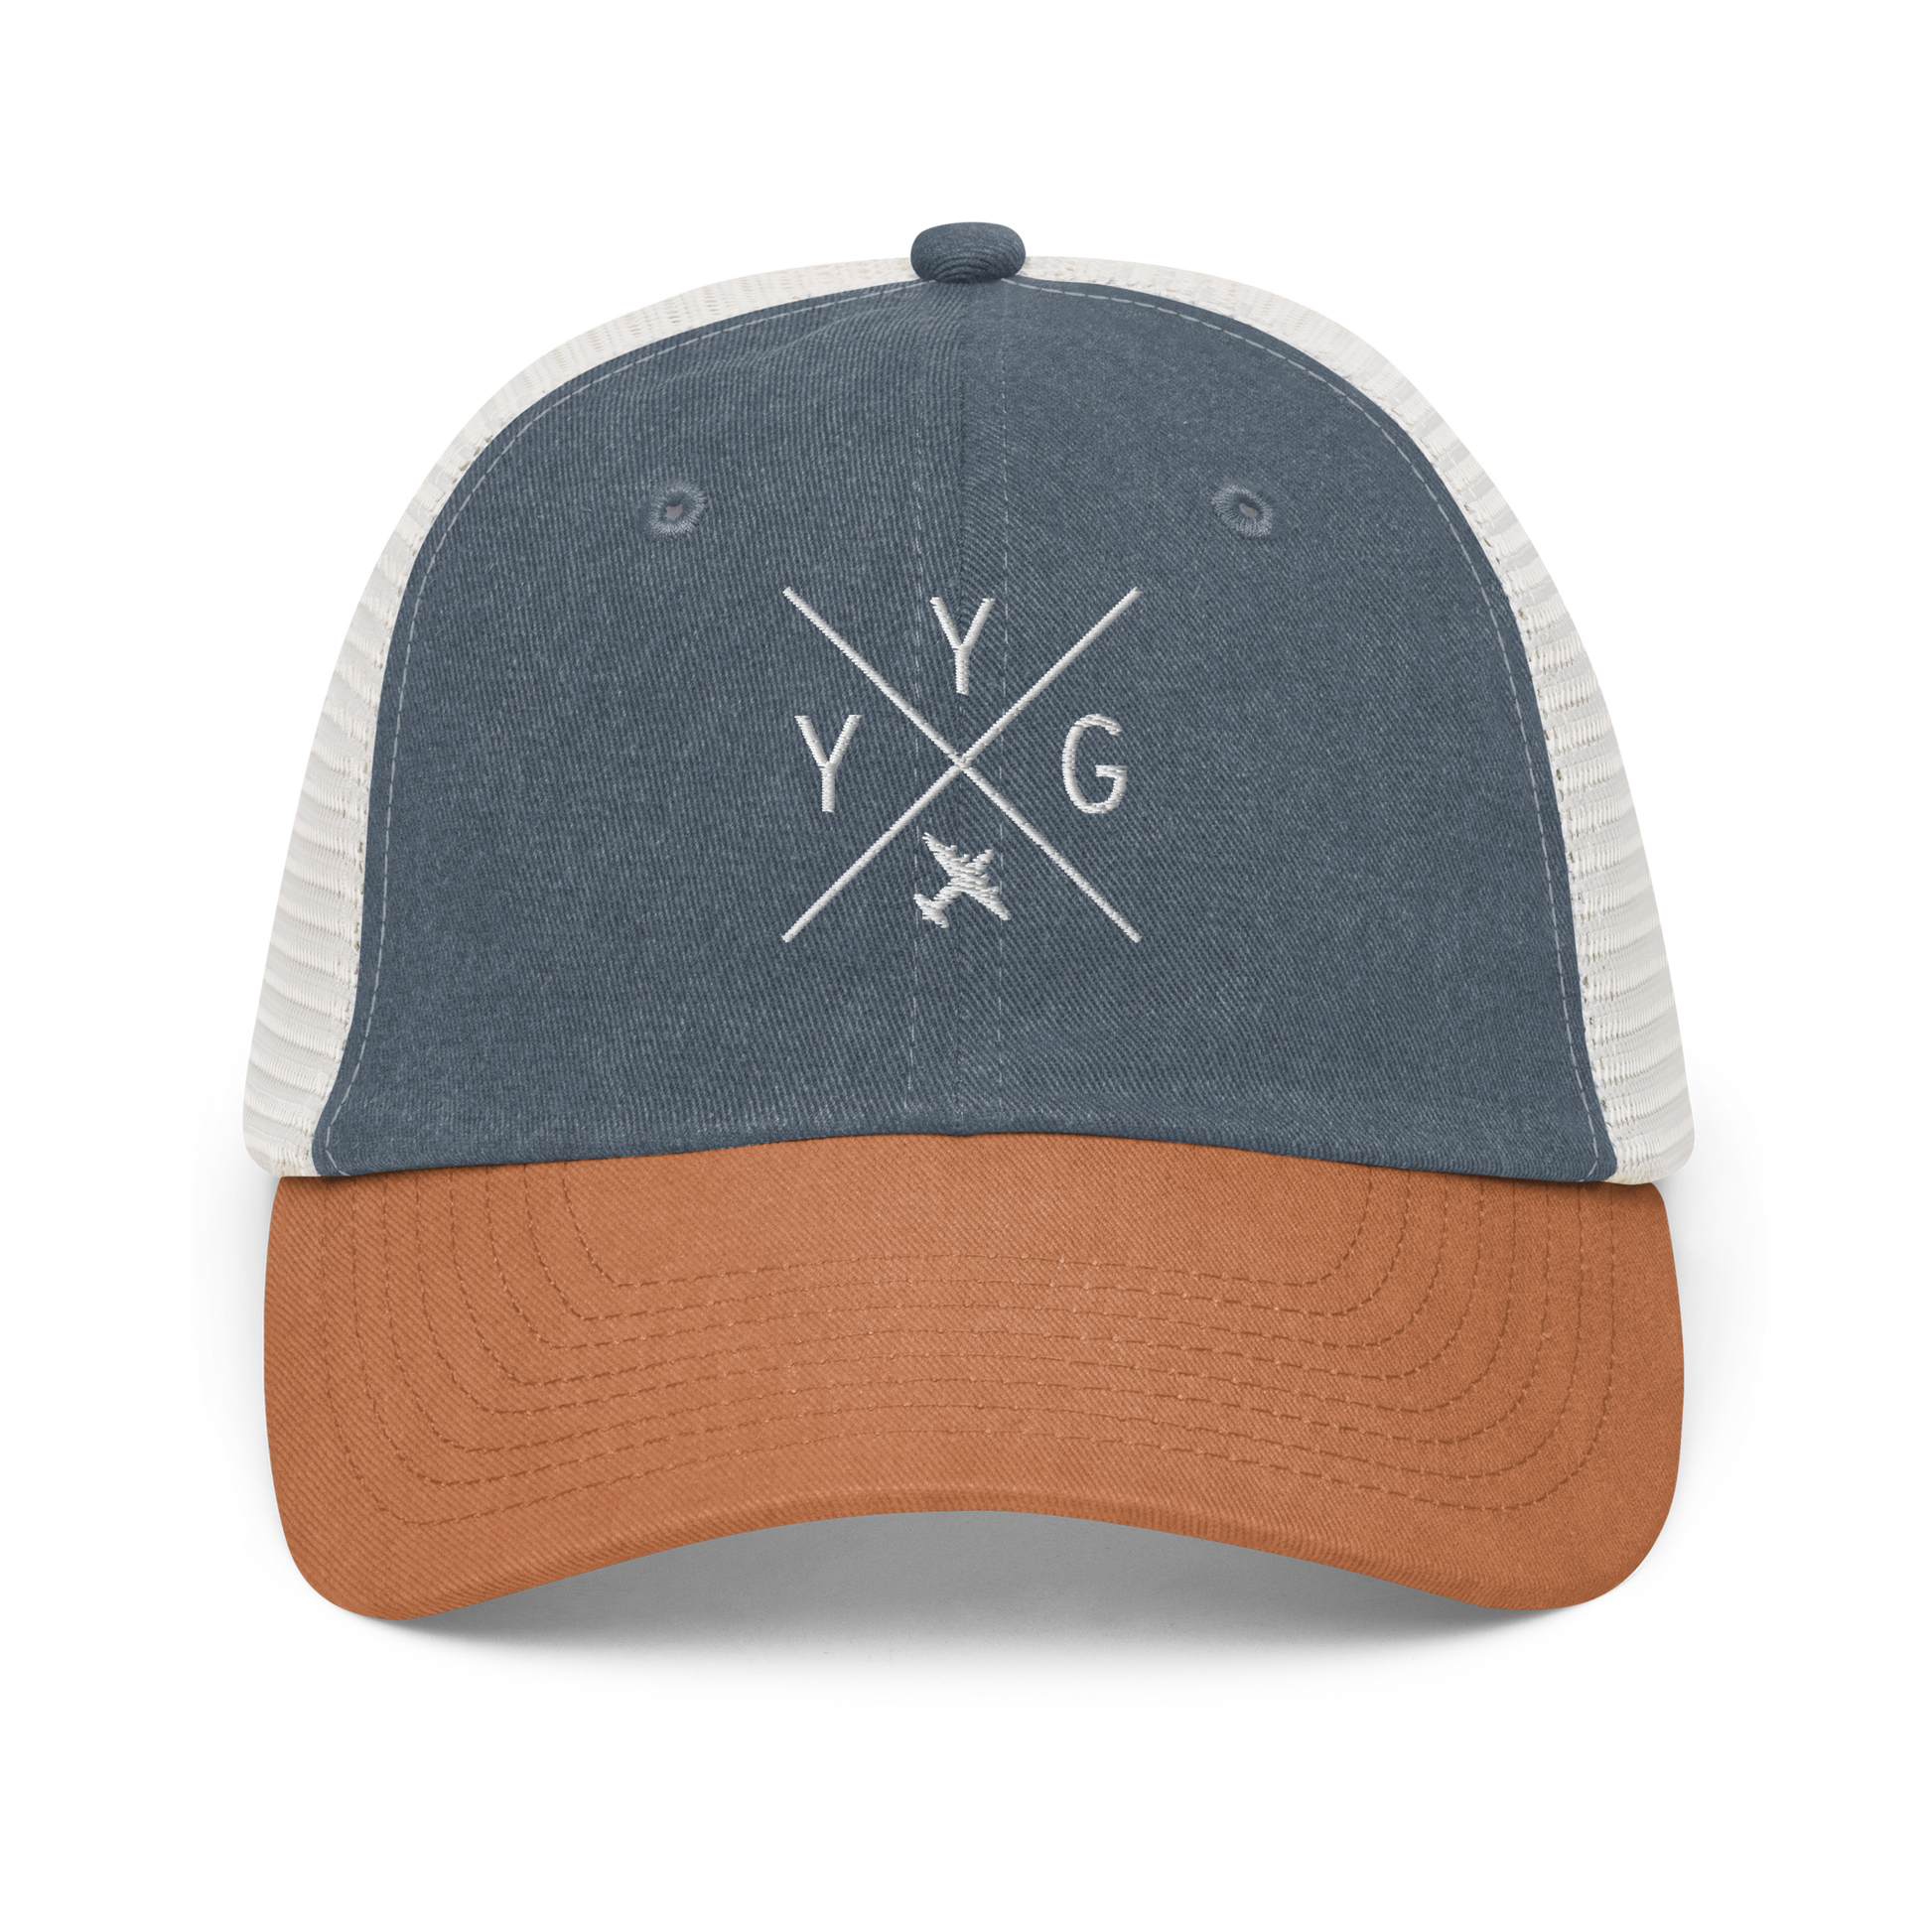 YHM Designs - YYG Charlottetown Pigment-Dyed Trucker Cap - Crossed-X Design with Airport Code and Vintage Propliner - White Embroidery - Image 15